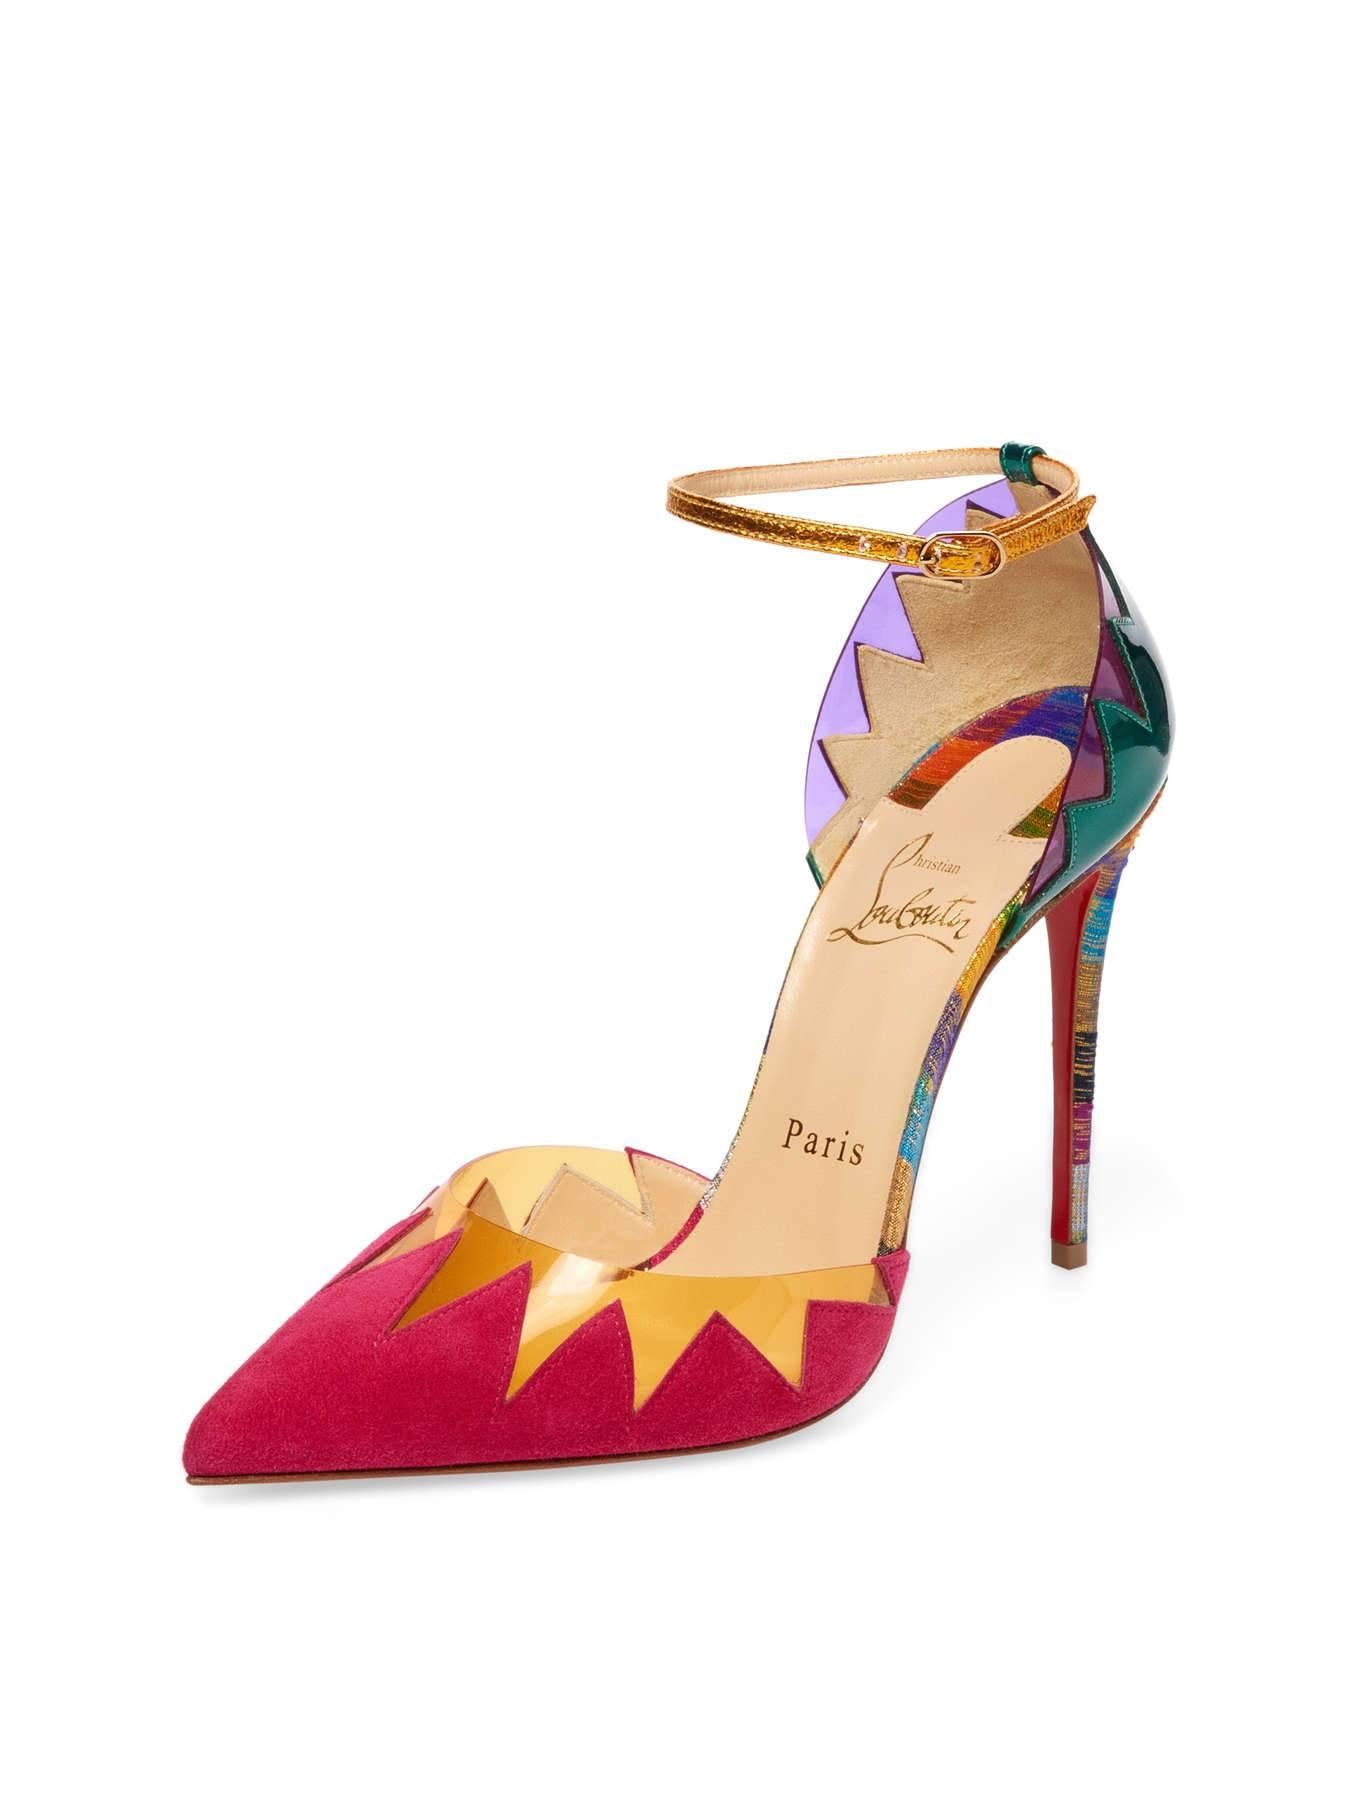 ONLY PAIR! Christian Louboutin New Red Gold Multi Color Flame High Heels Sandals in Box 

Size IT 36
Suede
Patent leather
Adjustable buckle at ankle strap
Made in Italy
Heel height 4.25